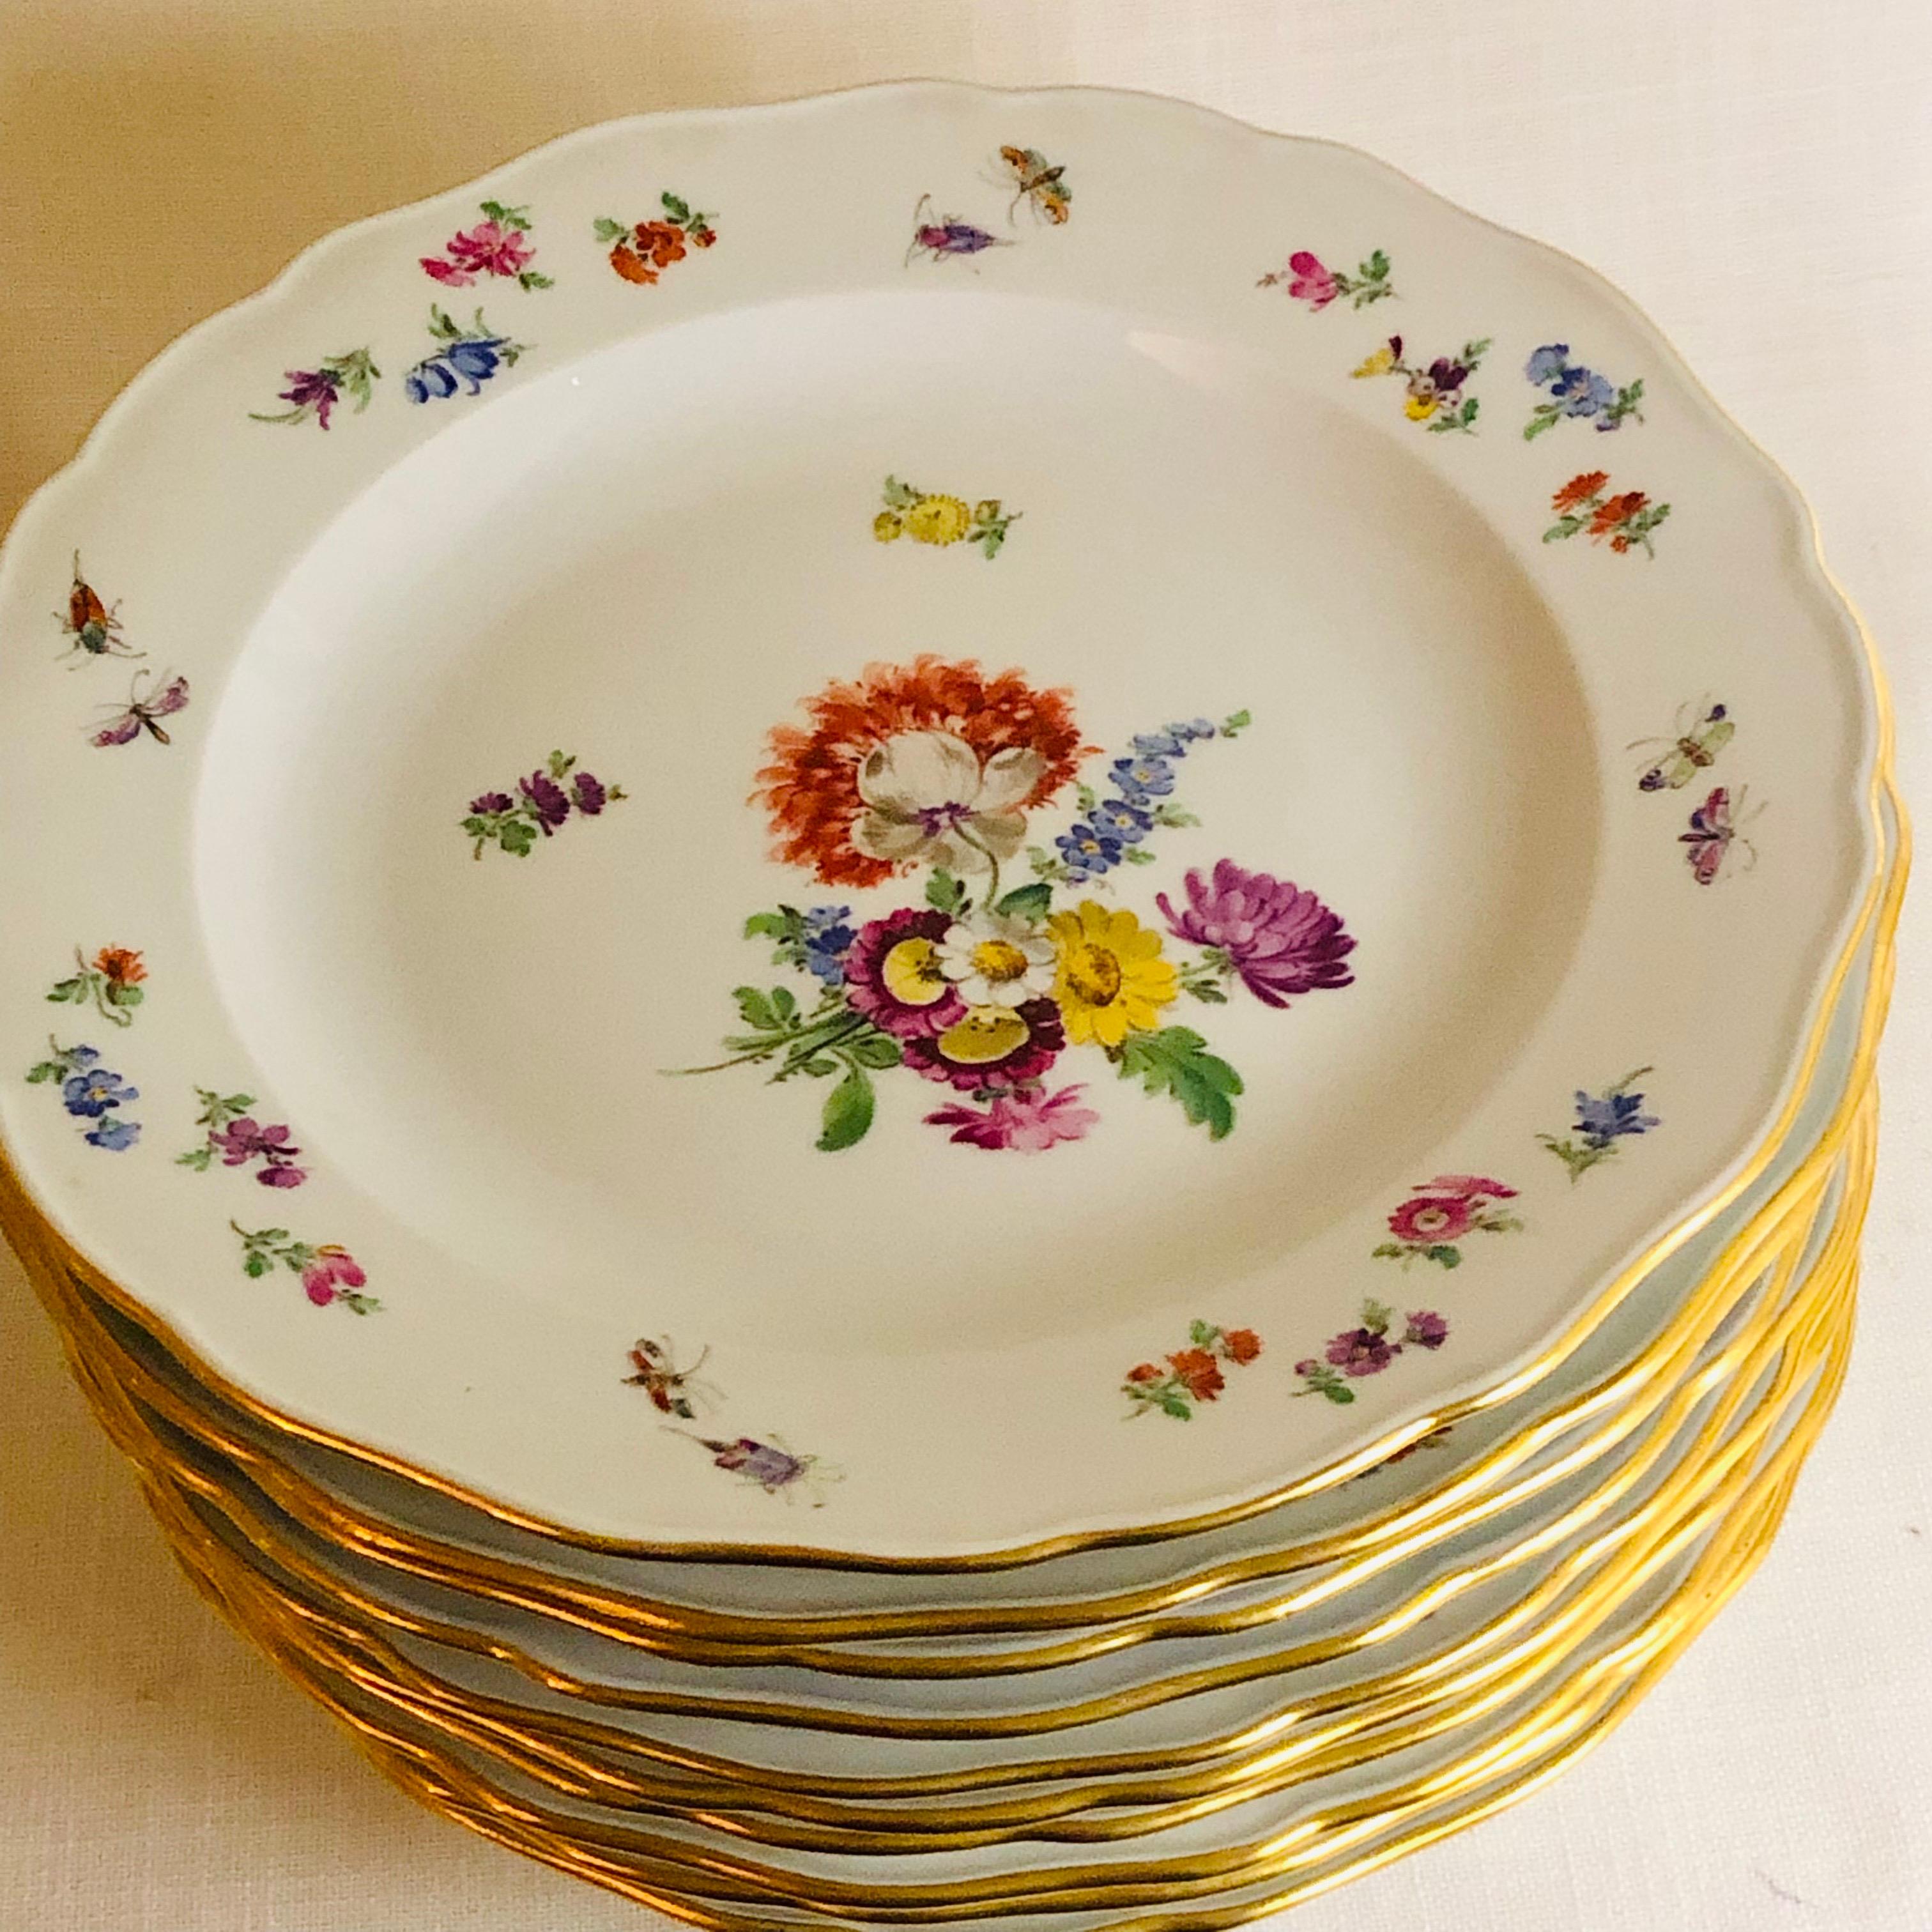 Set of 12 Meissen Dinner Plates Each Painted with a Different Bouquet of Flowers 4